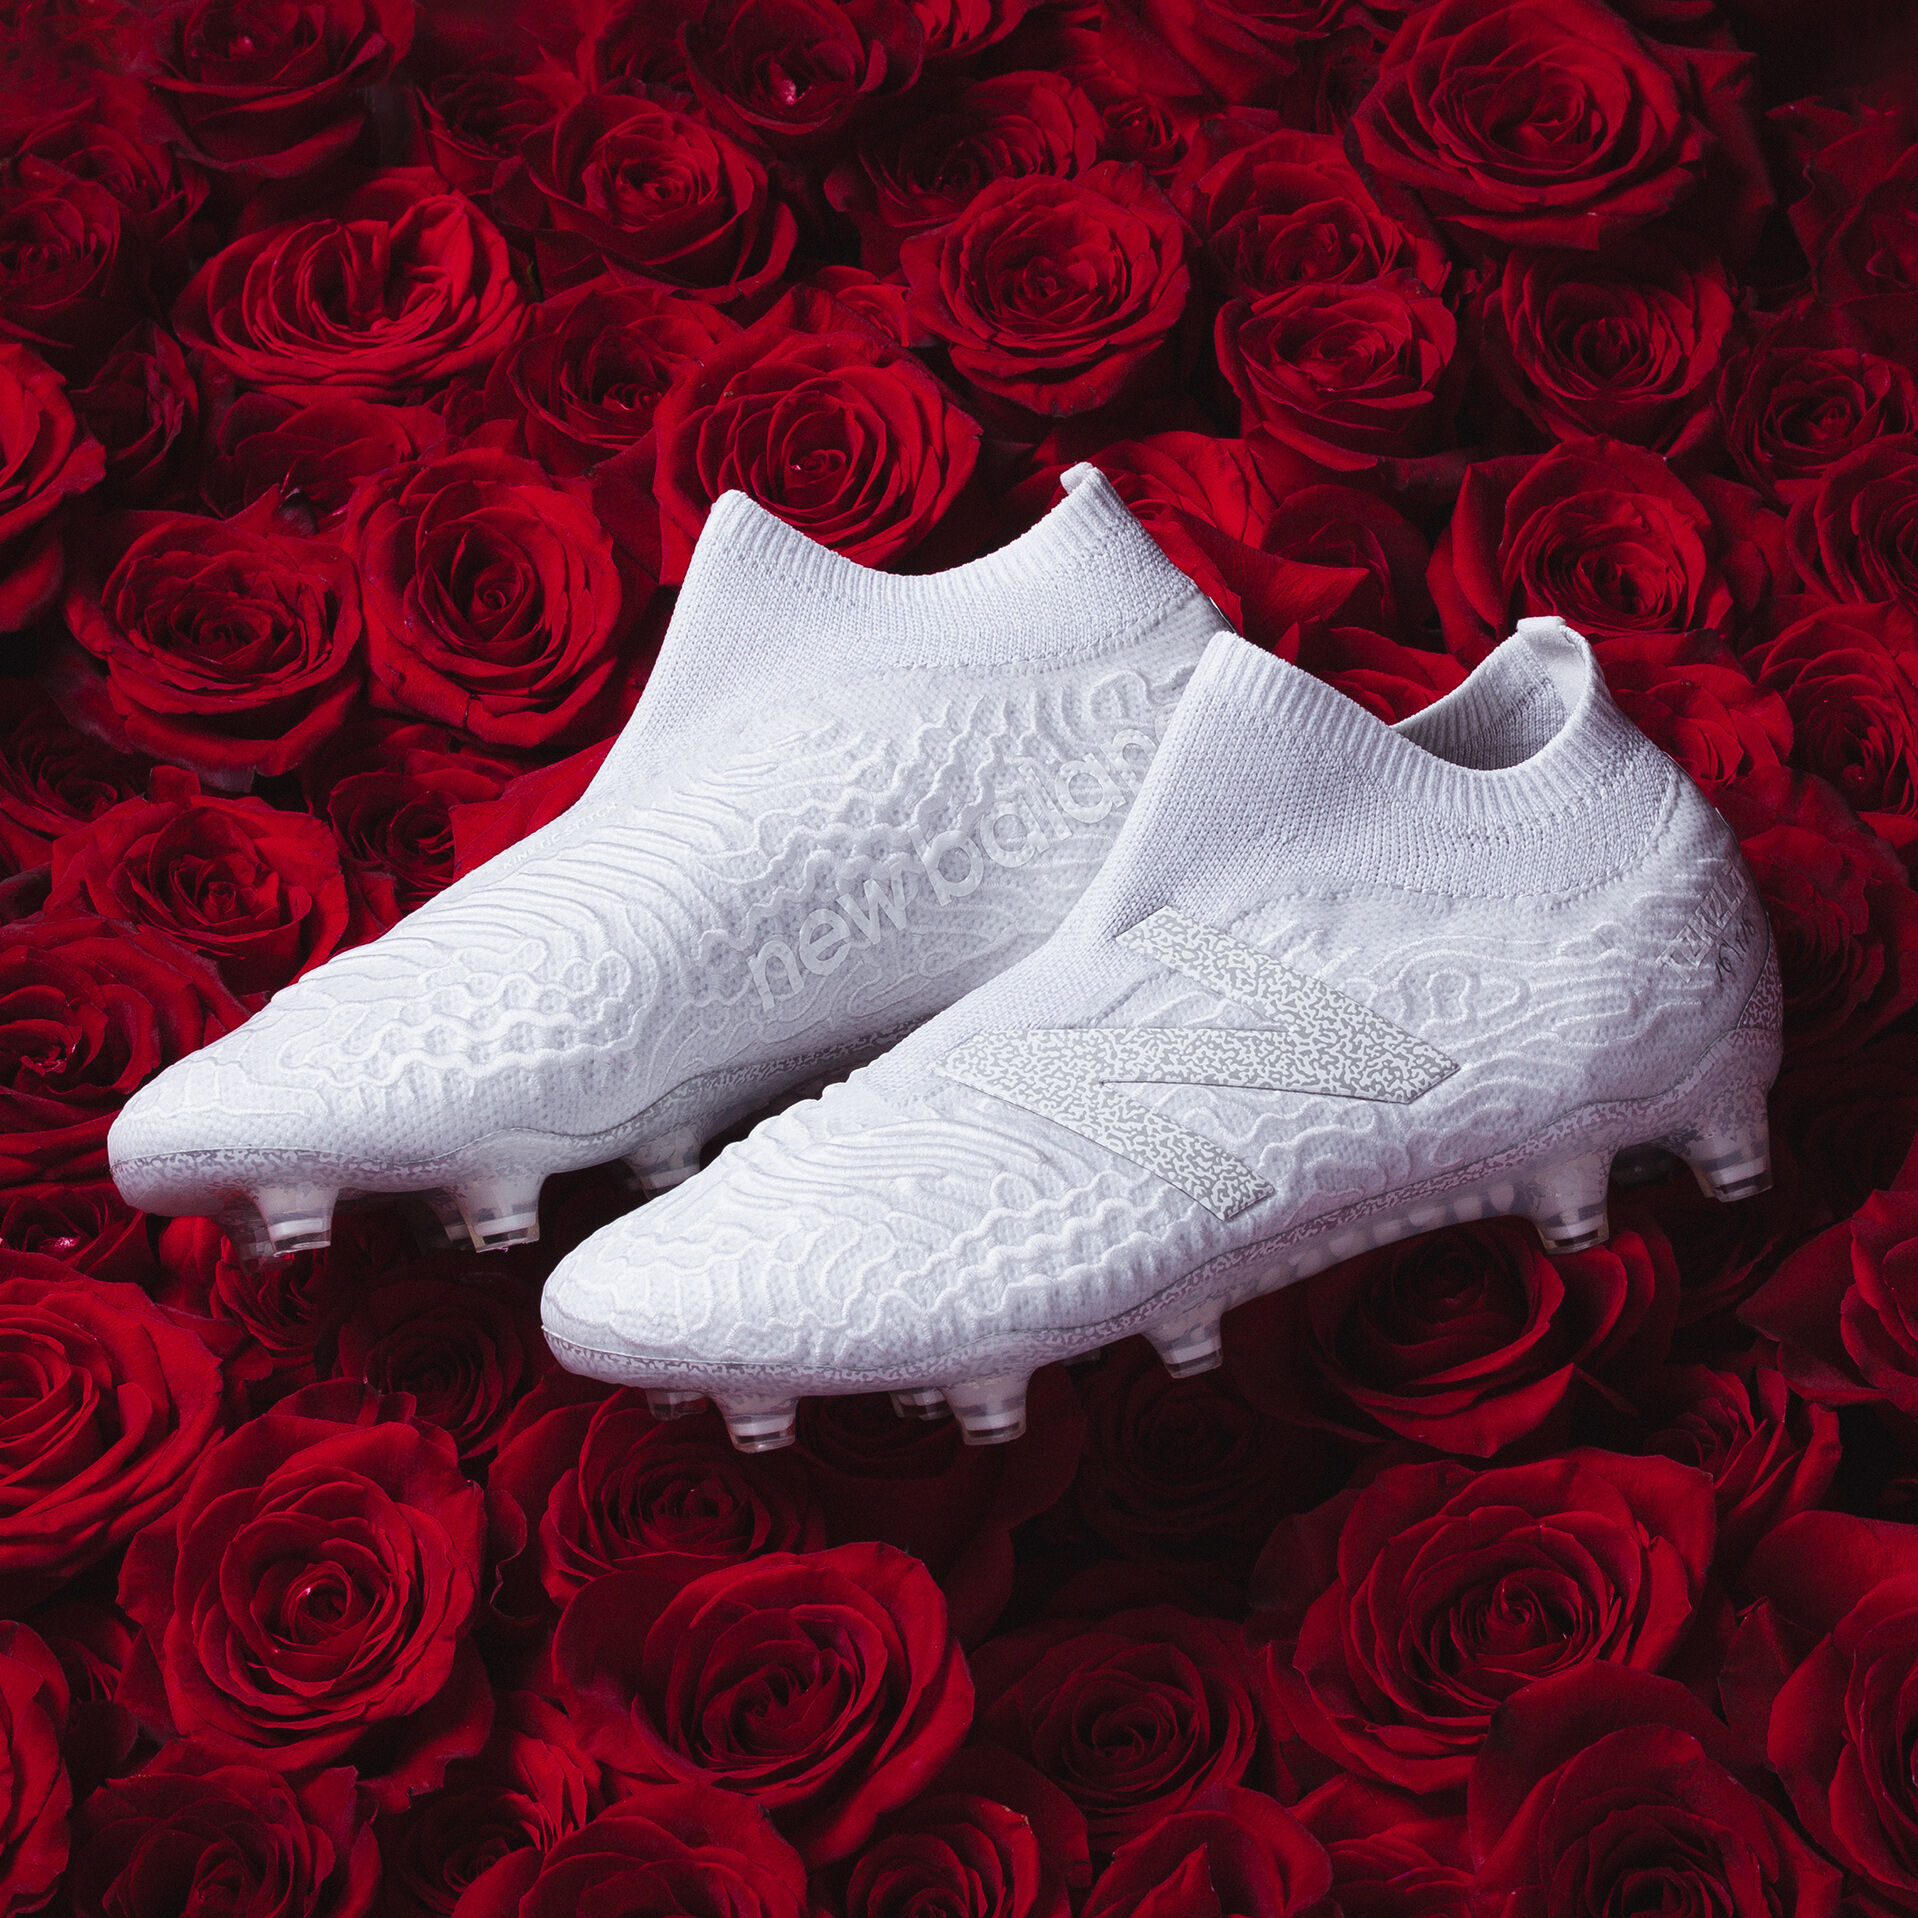 New Balance Rose Lavelle Cleats Sell Out In 24 Hours